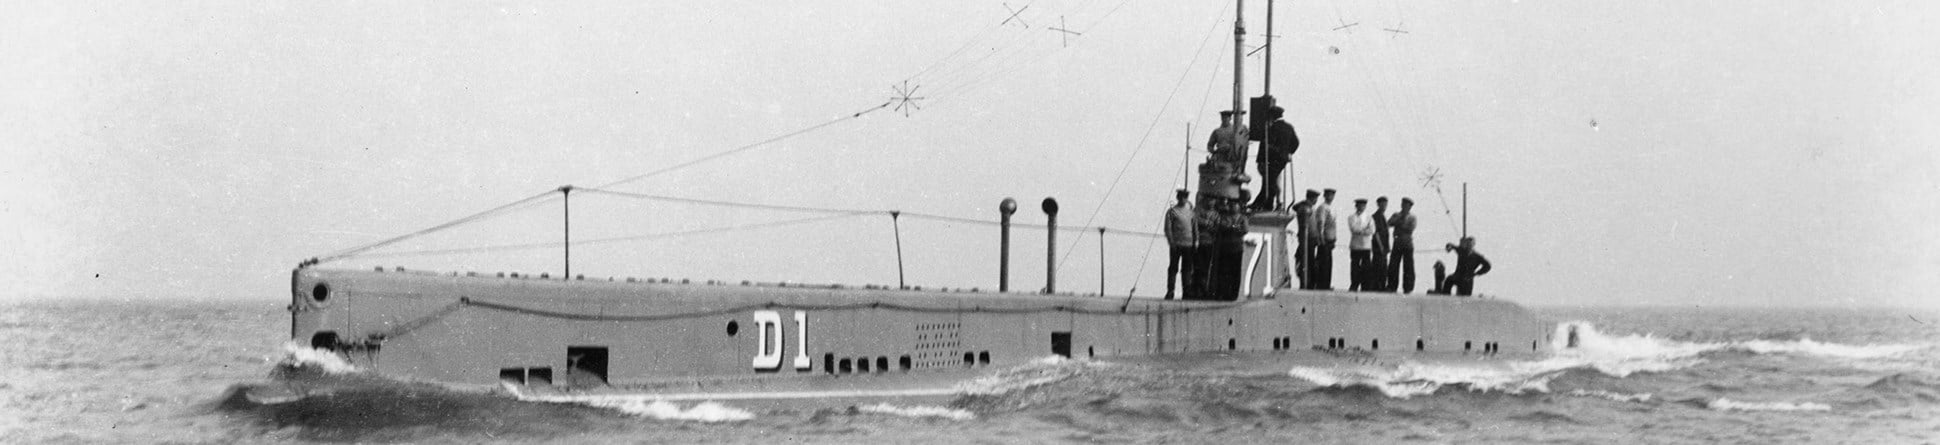 Sailors standing on a submarine at sea